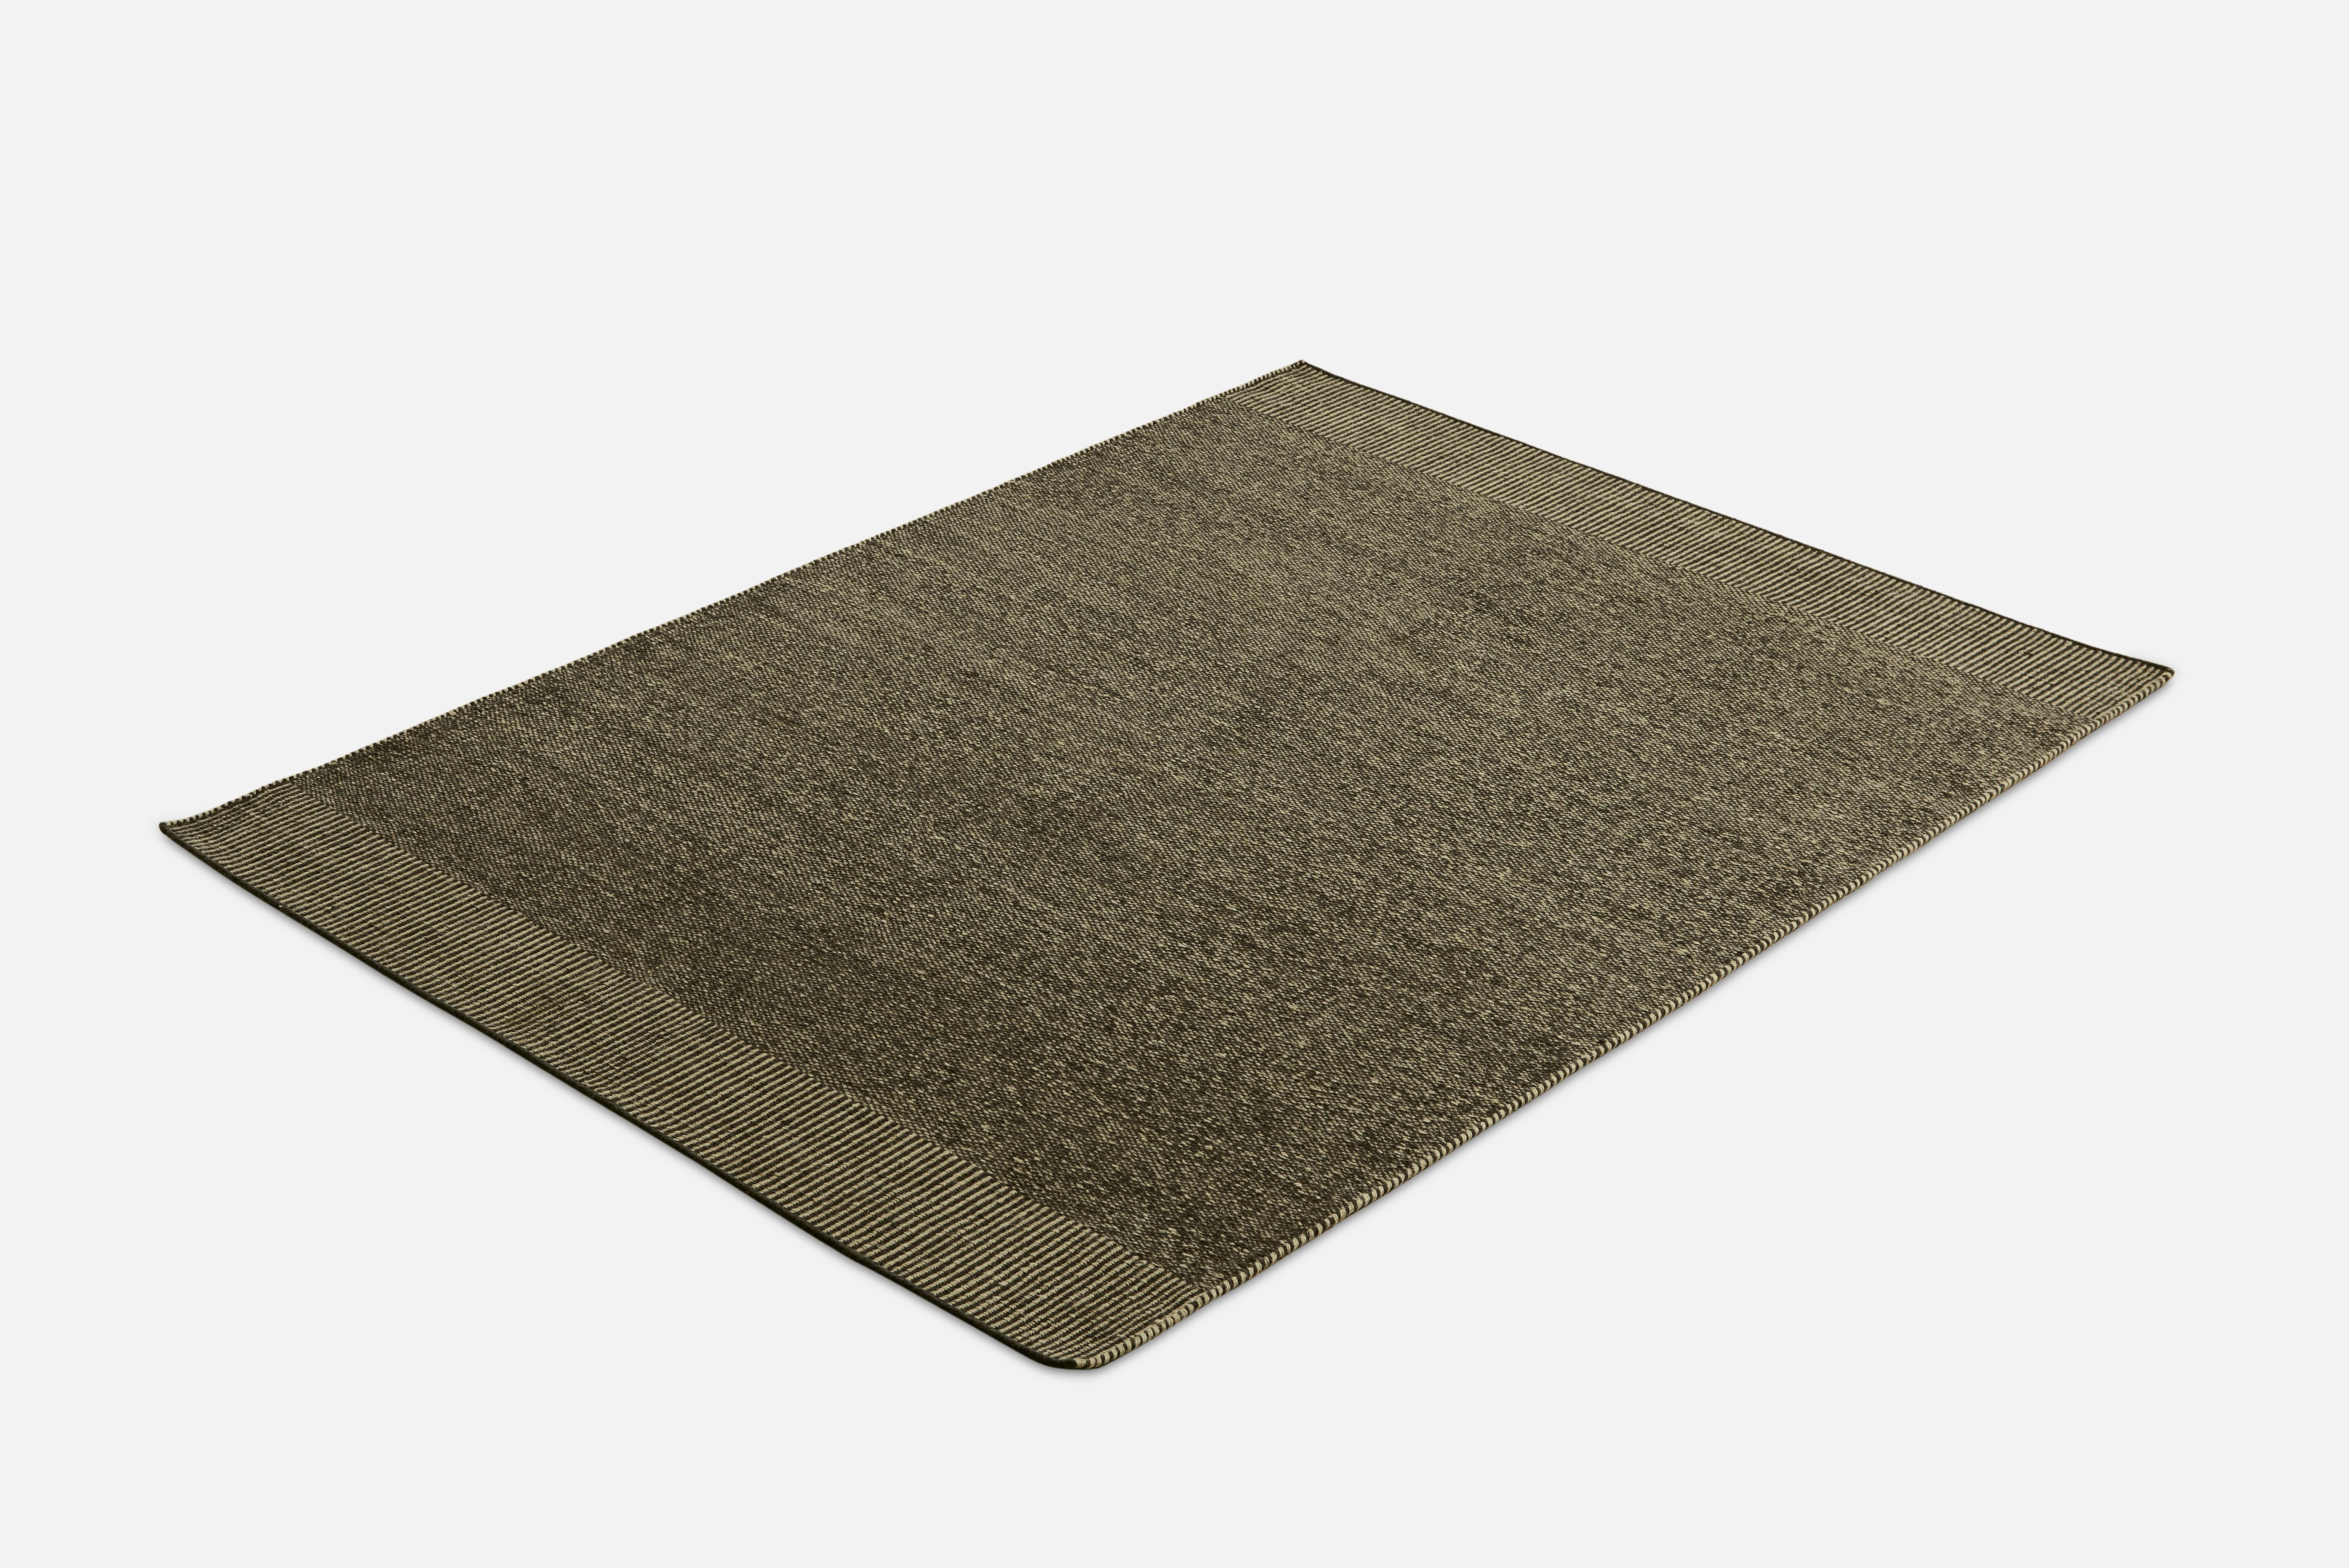 Large Green Rombo rug by Studio MLR
Materials: 65% wool, 35% jute.
Dimensions: W 170 x L 240 cm
Available in 3 sizes: W90 x L140, W170 x L240, W75 x L200 cm.
Available in grey, moss green and rust.

Rombo is characterised by the materials used